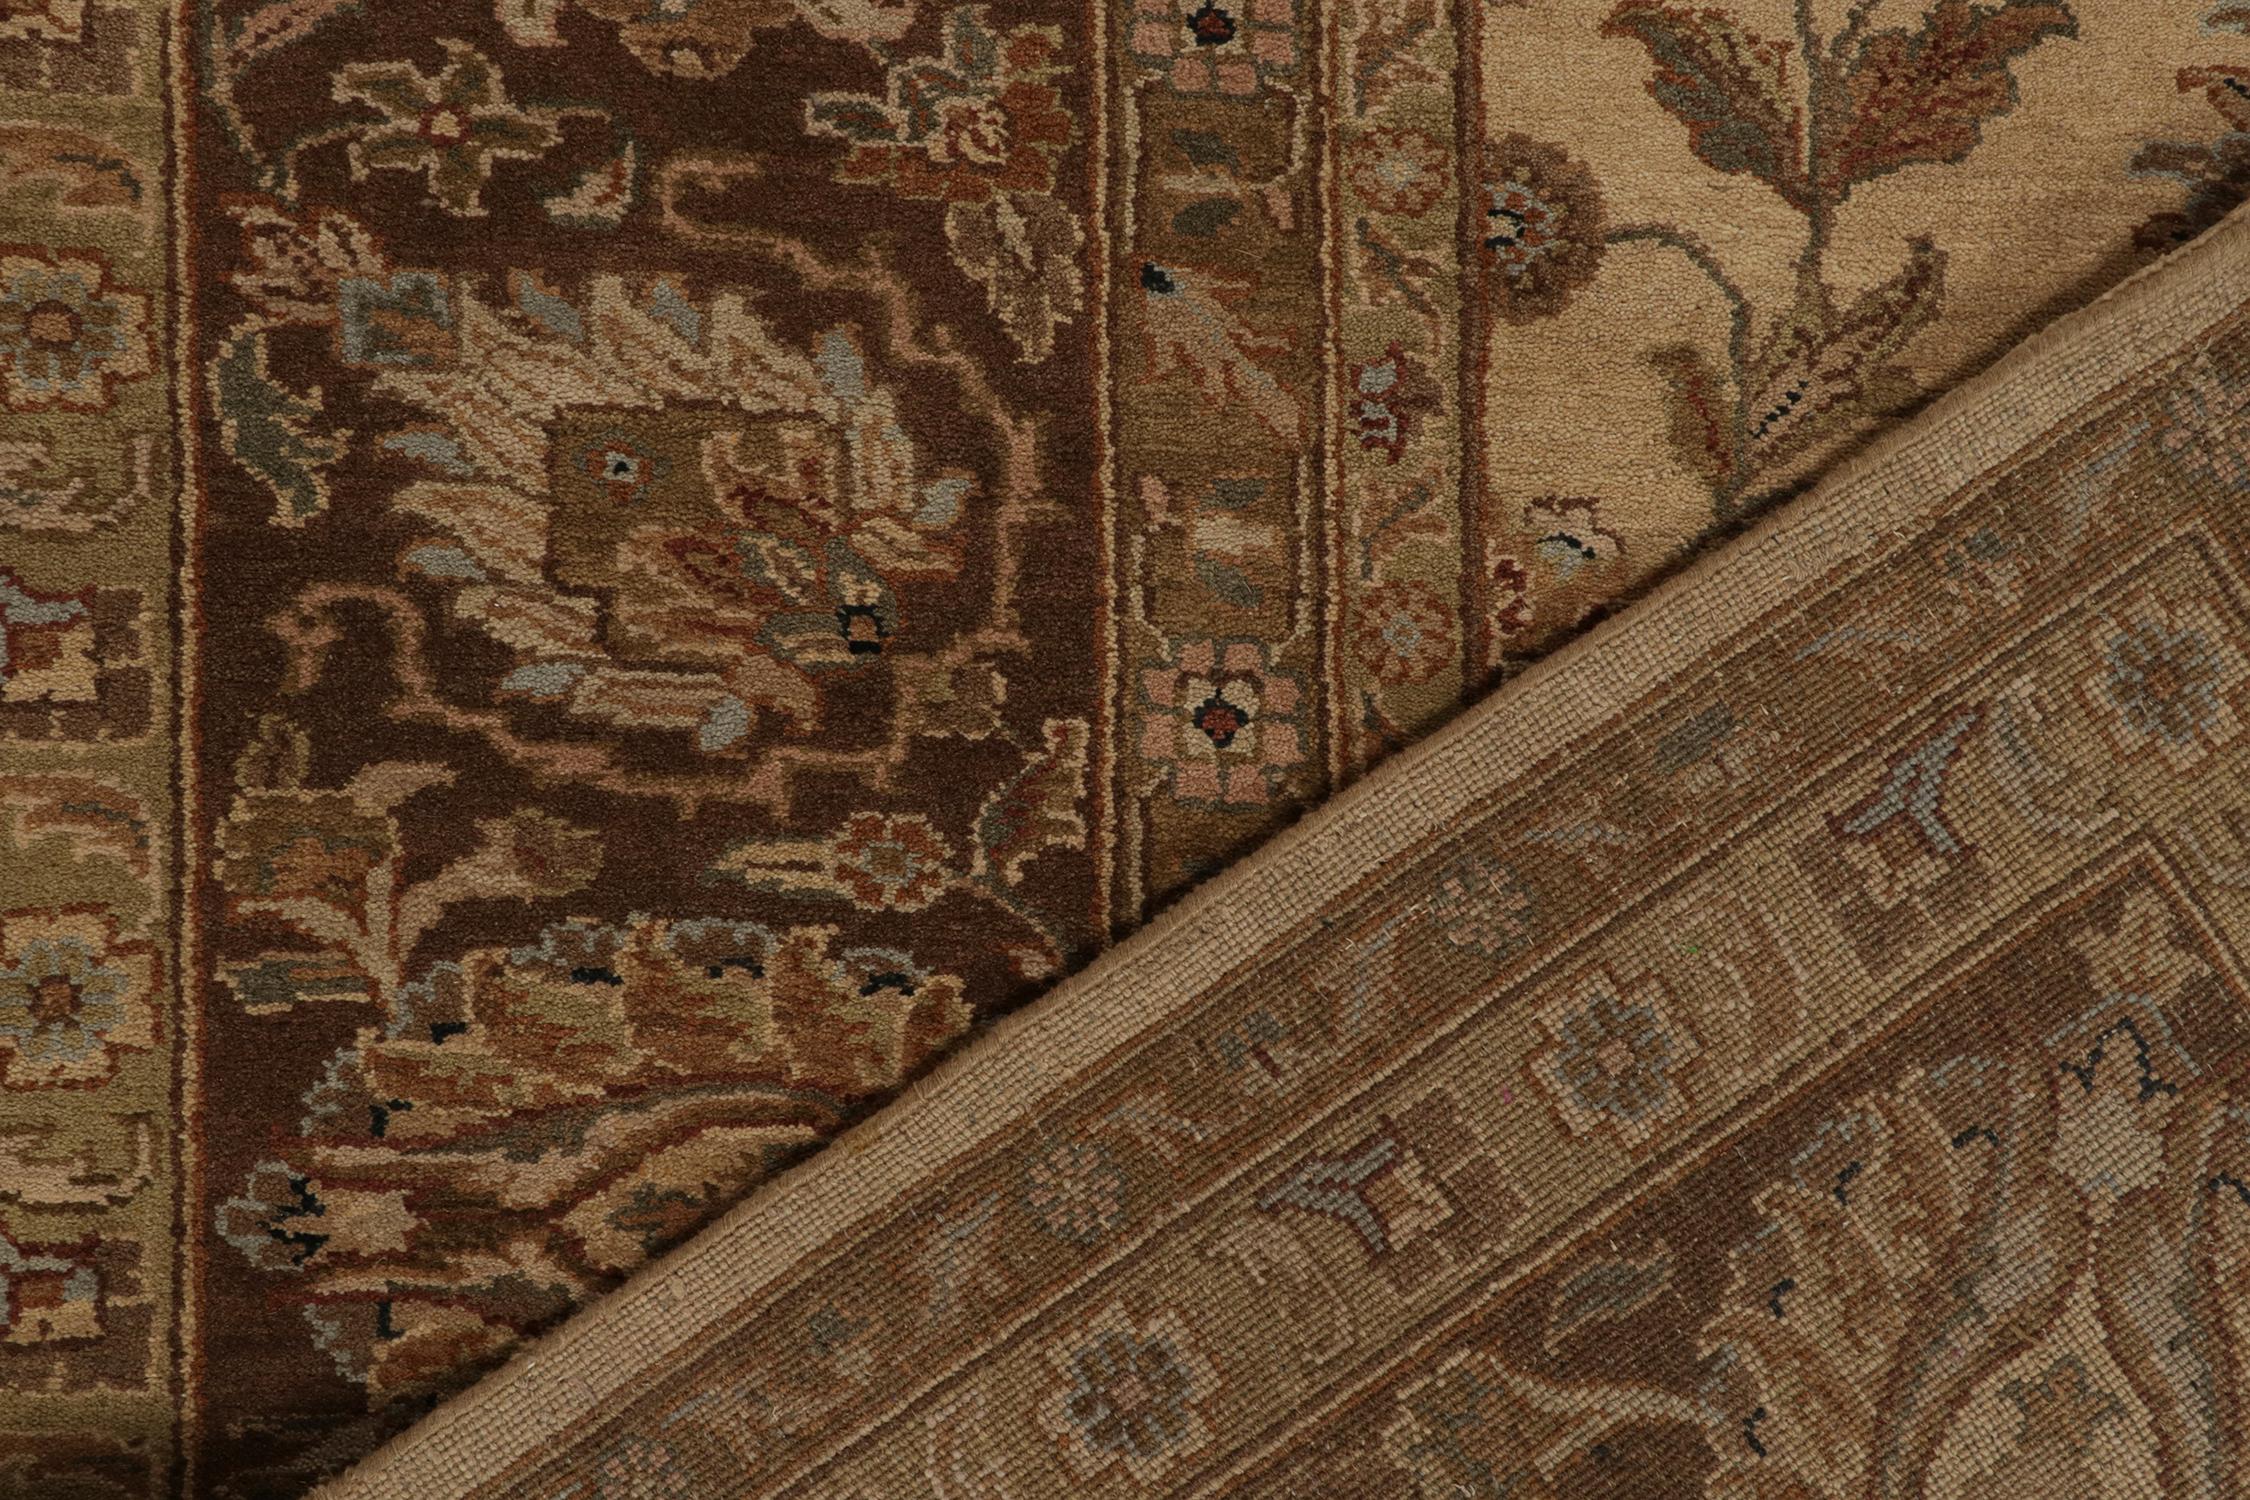 Rug & Kilim’s Persian Style rug in Beige-Brown and Gold Floral Pattern In New Condition For Sale In Long Island City, NY